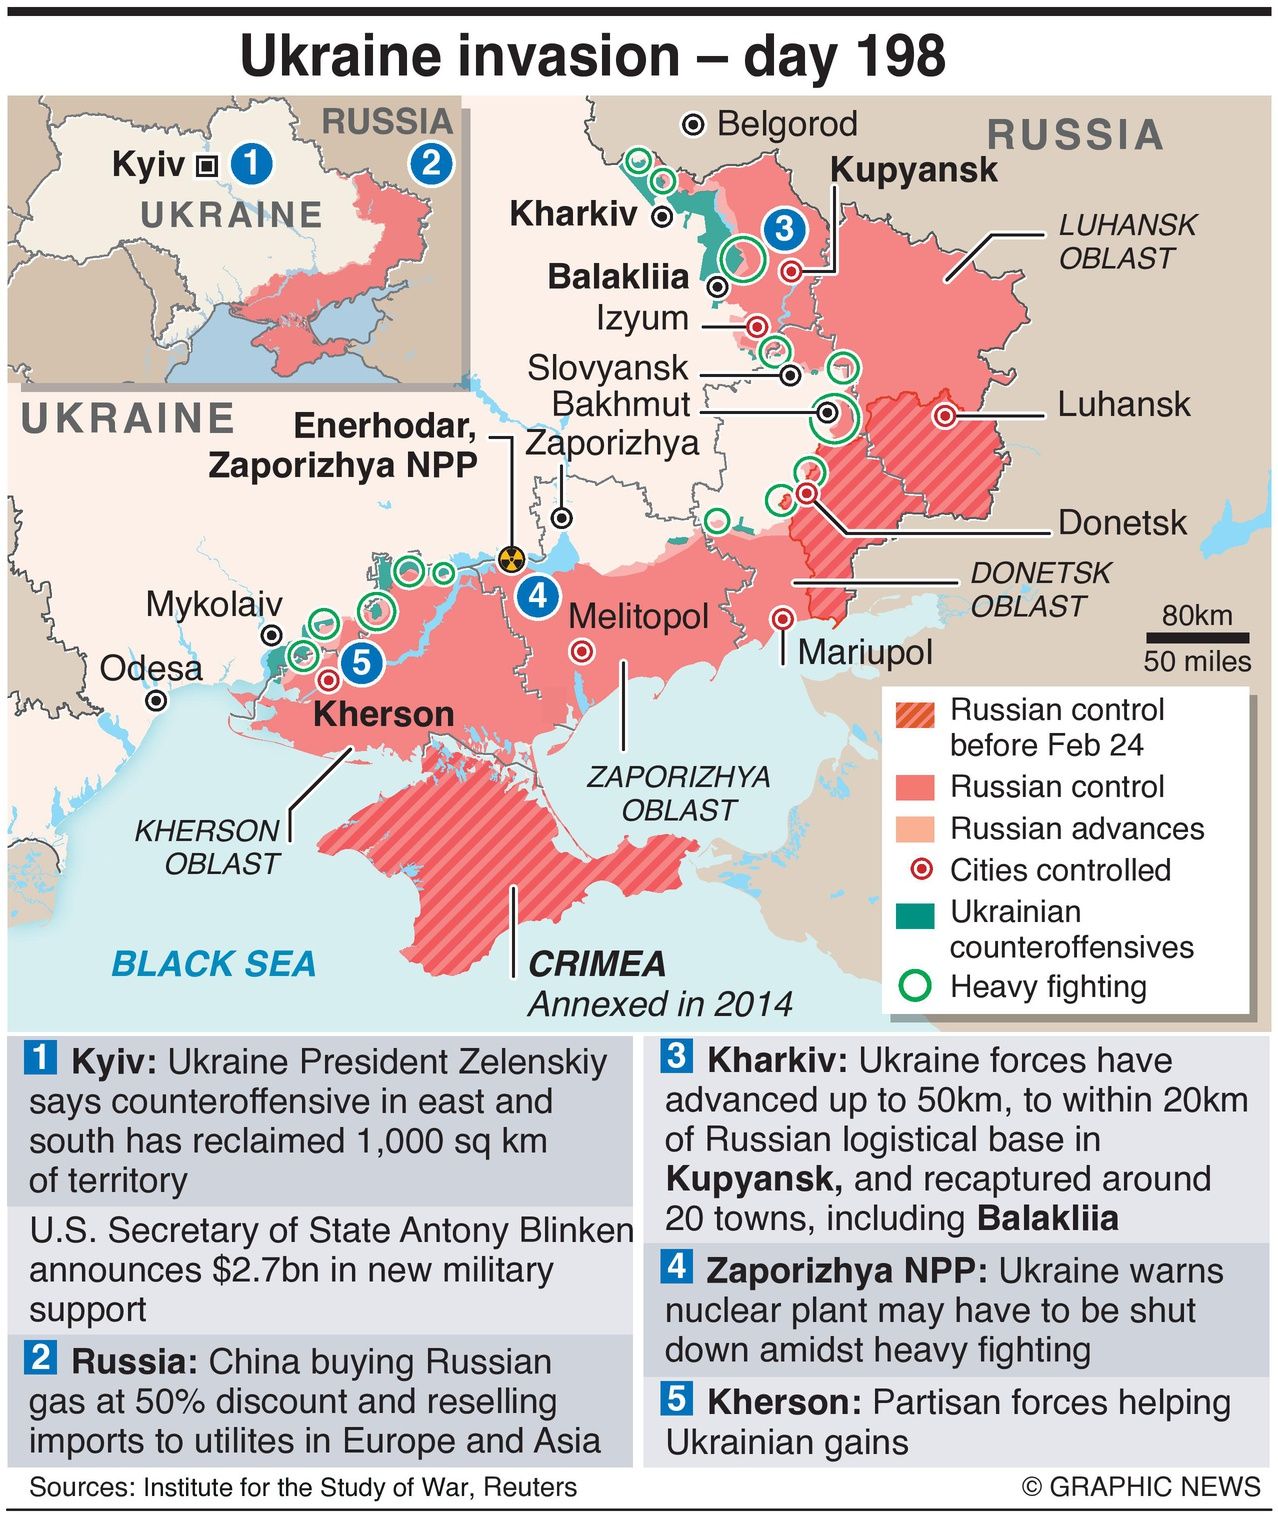 Map depicting the Ukrainian-Russia war on day 198 since Russia's intial invasion